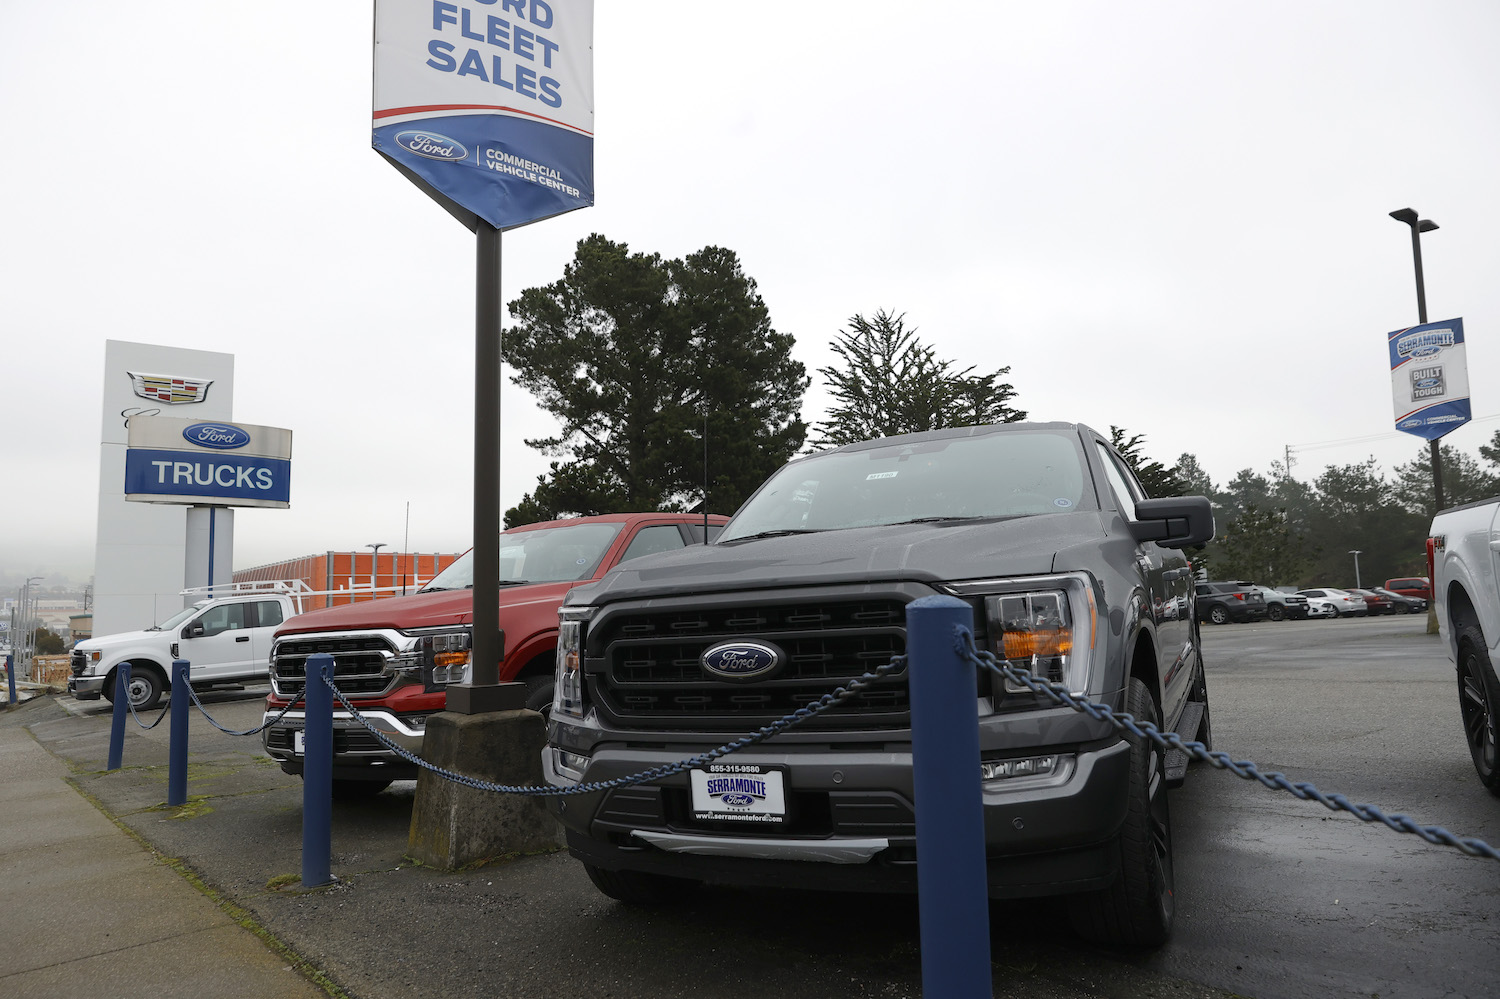 A row of new Ford F-150 and Super Duty pickup trucks parked at a dealership, Ford signs visible in teh background.